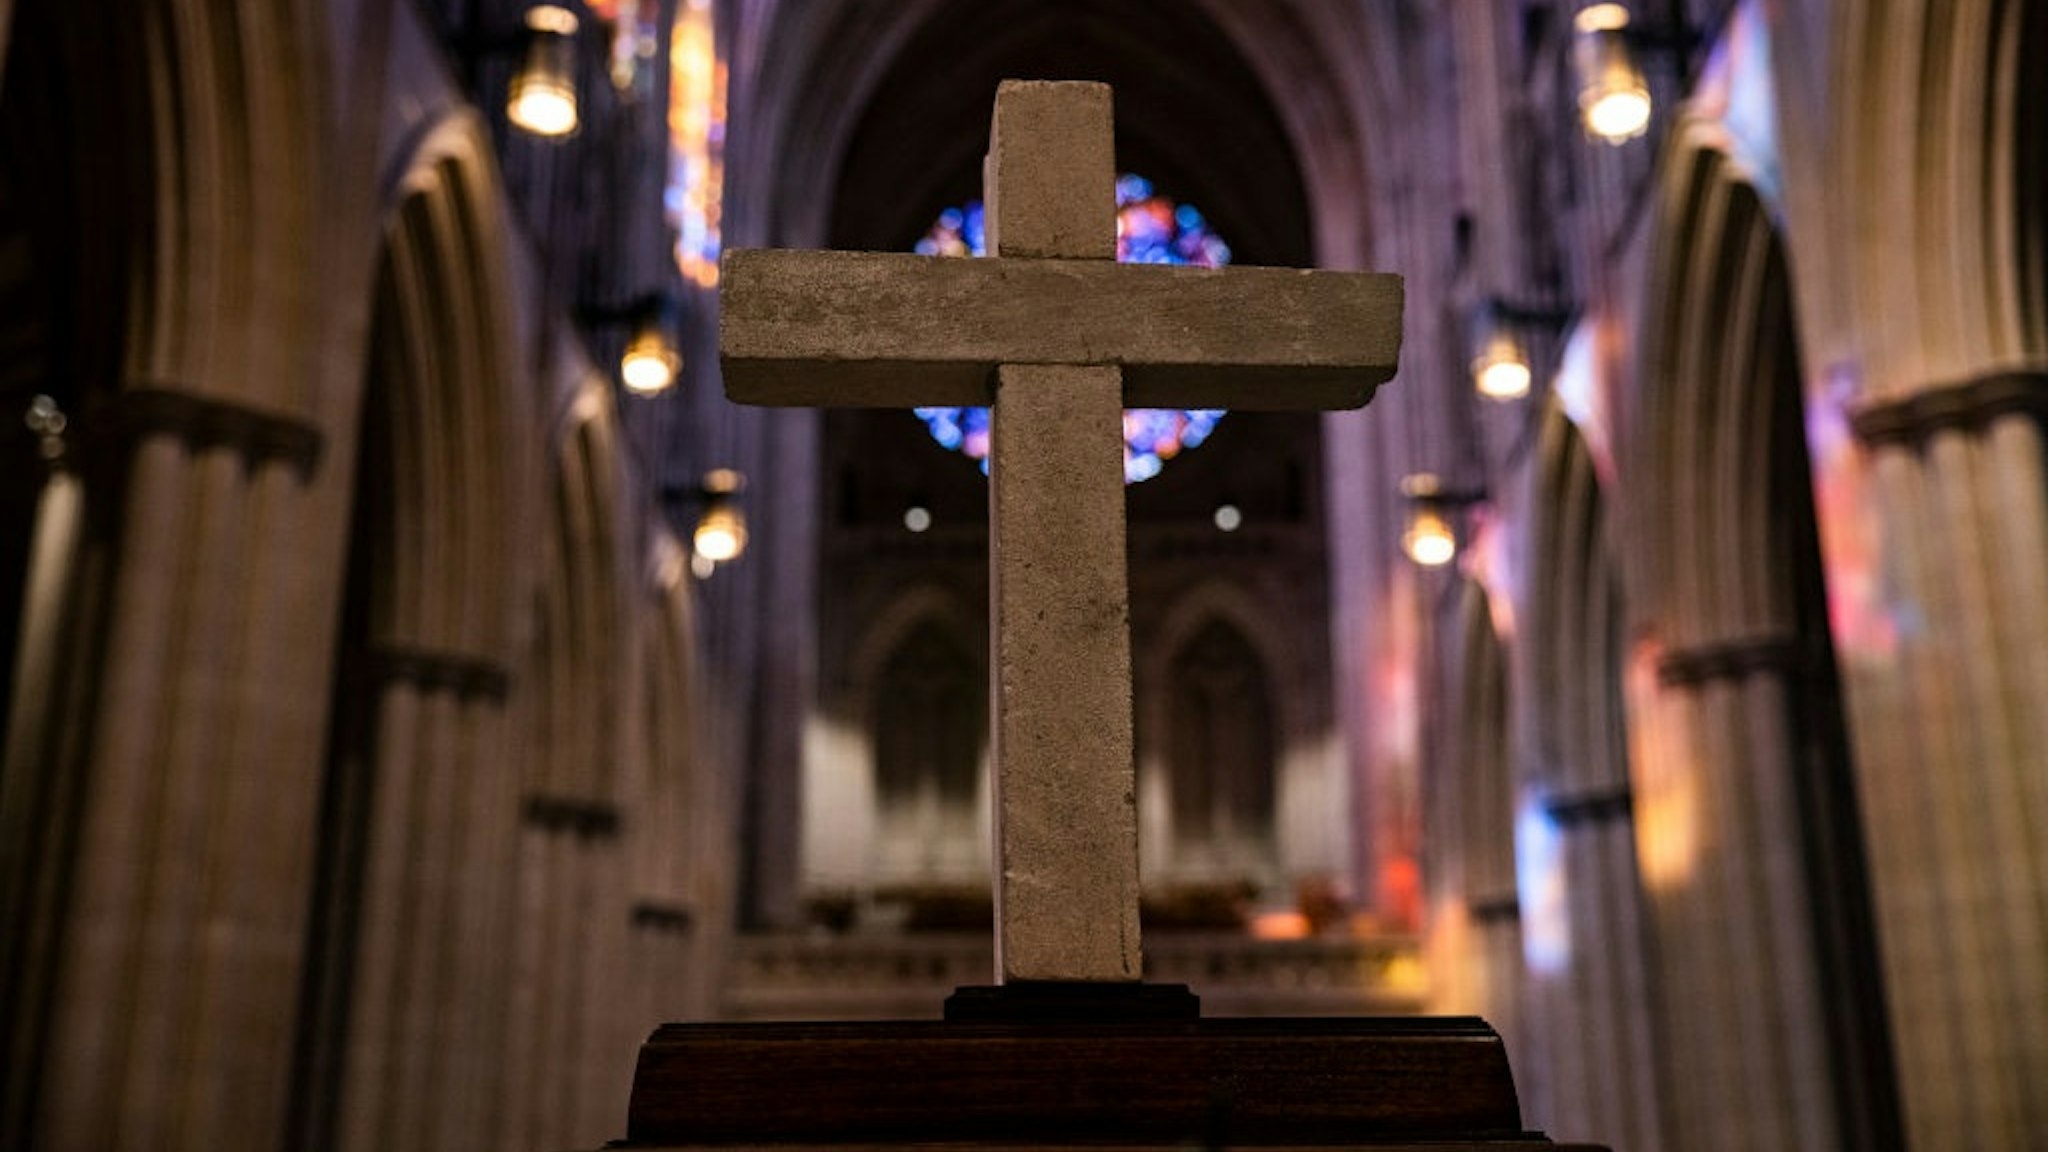 WASHINGTON, DC - SEPTEMBER 12: A piece of rubble in the shape of a cross that was pulled from the rubble at the Pentagon in the 9/11 terrorist attacks sits in the nave of the Washington National Cathedral on September 12, 2021 in Washington, DC.